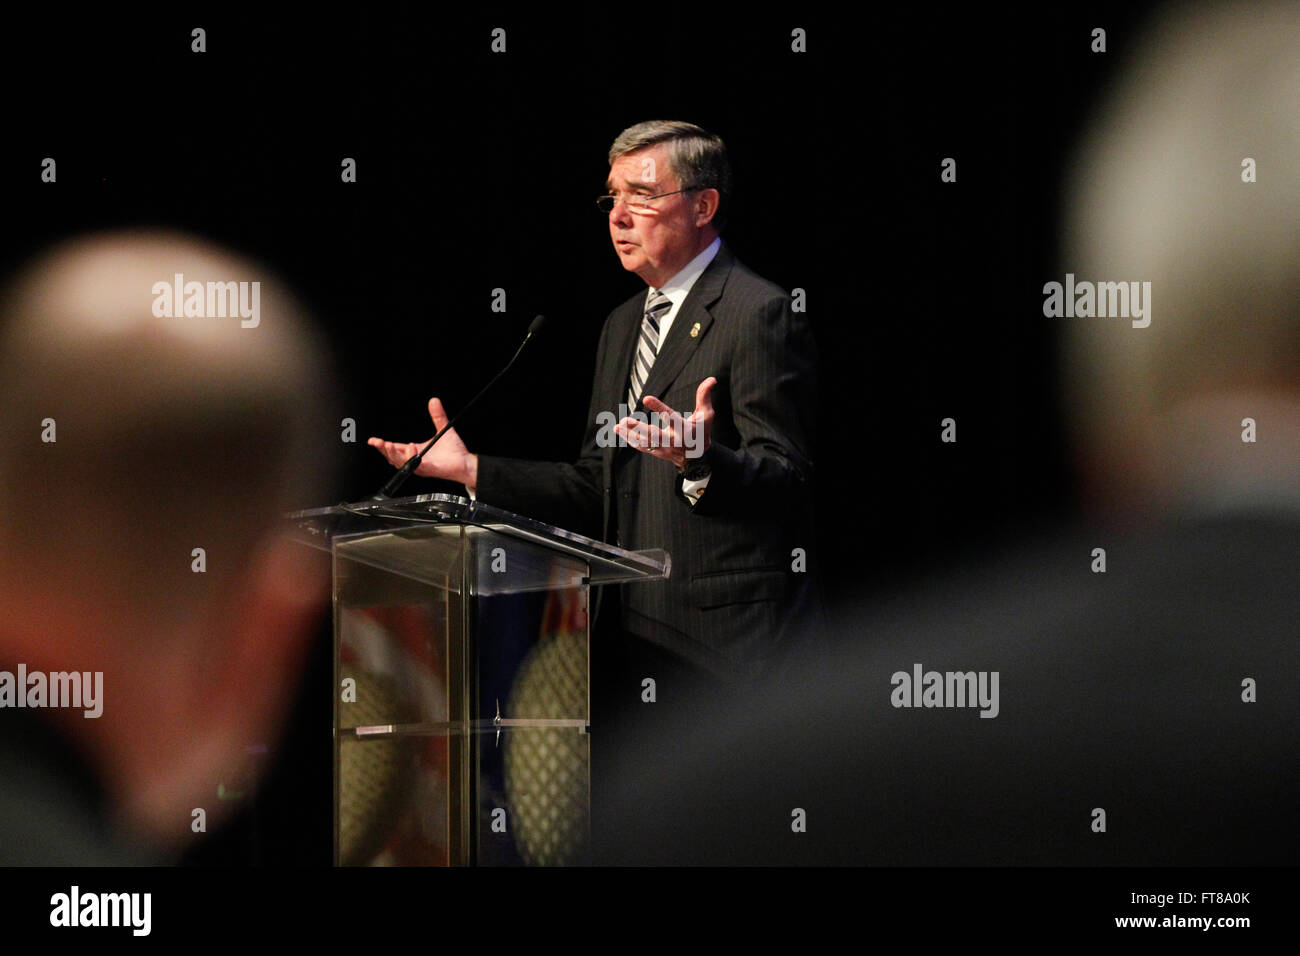 U.S. Customs and Border Protection Commissioner R. Gil Kerlikowske delivers opening remarks at the 2015 East Coast Trade Symposium held in Baltimore, Md., Nov. 4, 2015. (U.S. Customs and Border Protection Photo by Glenn Fawcett) Stock Photo